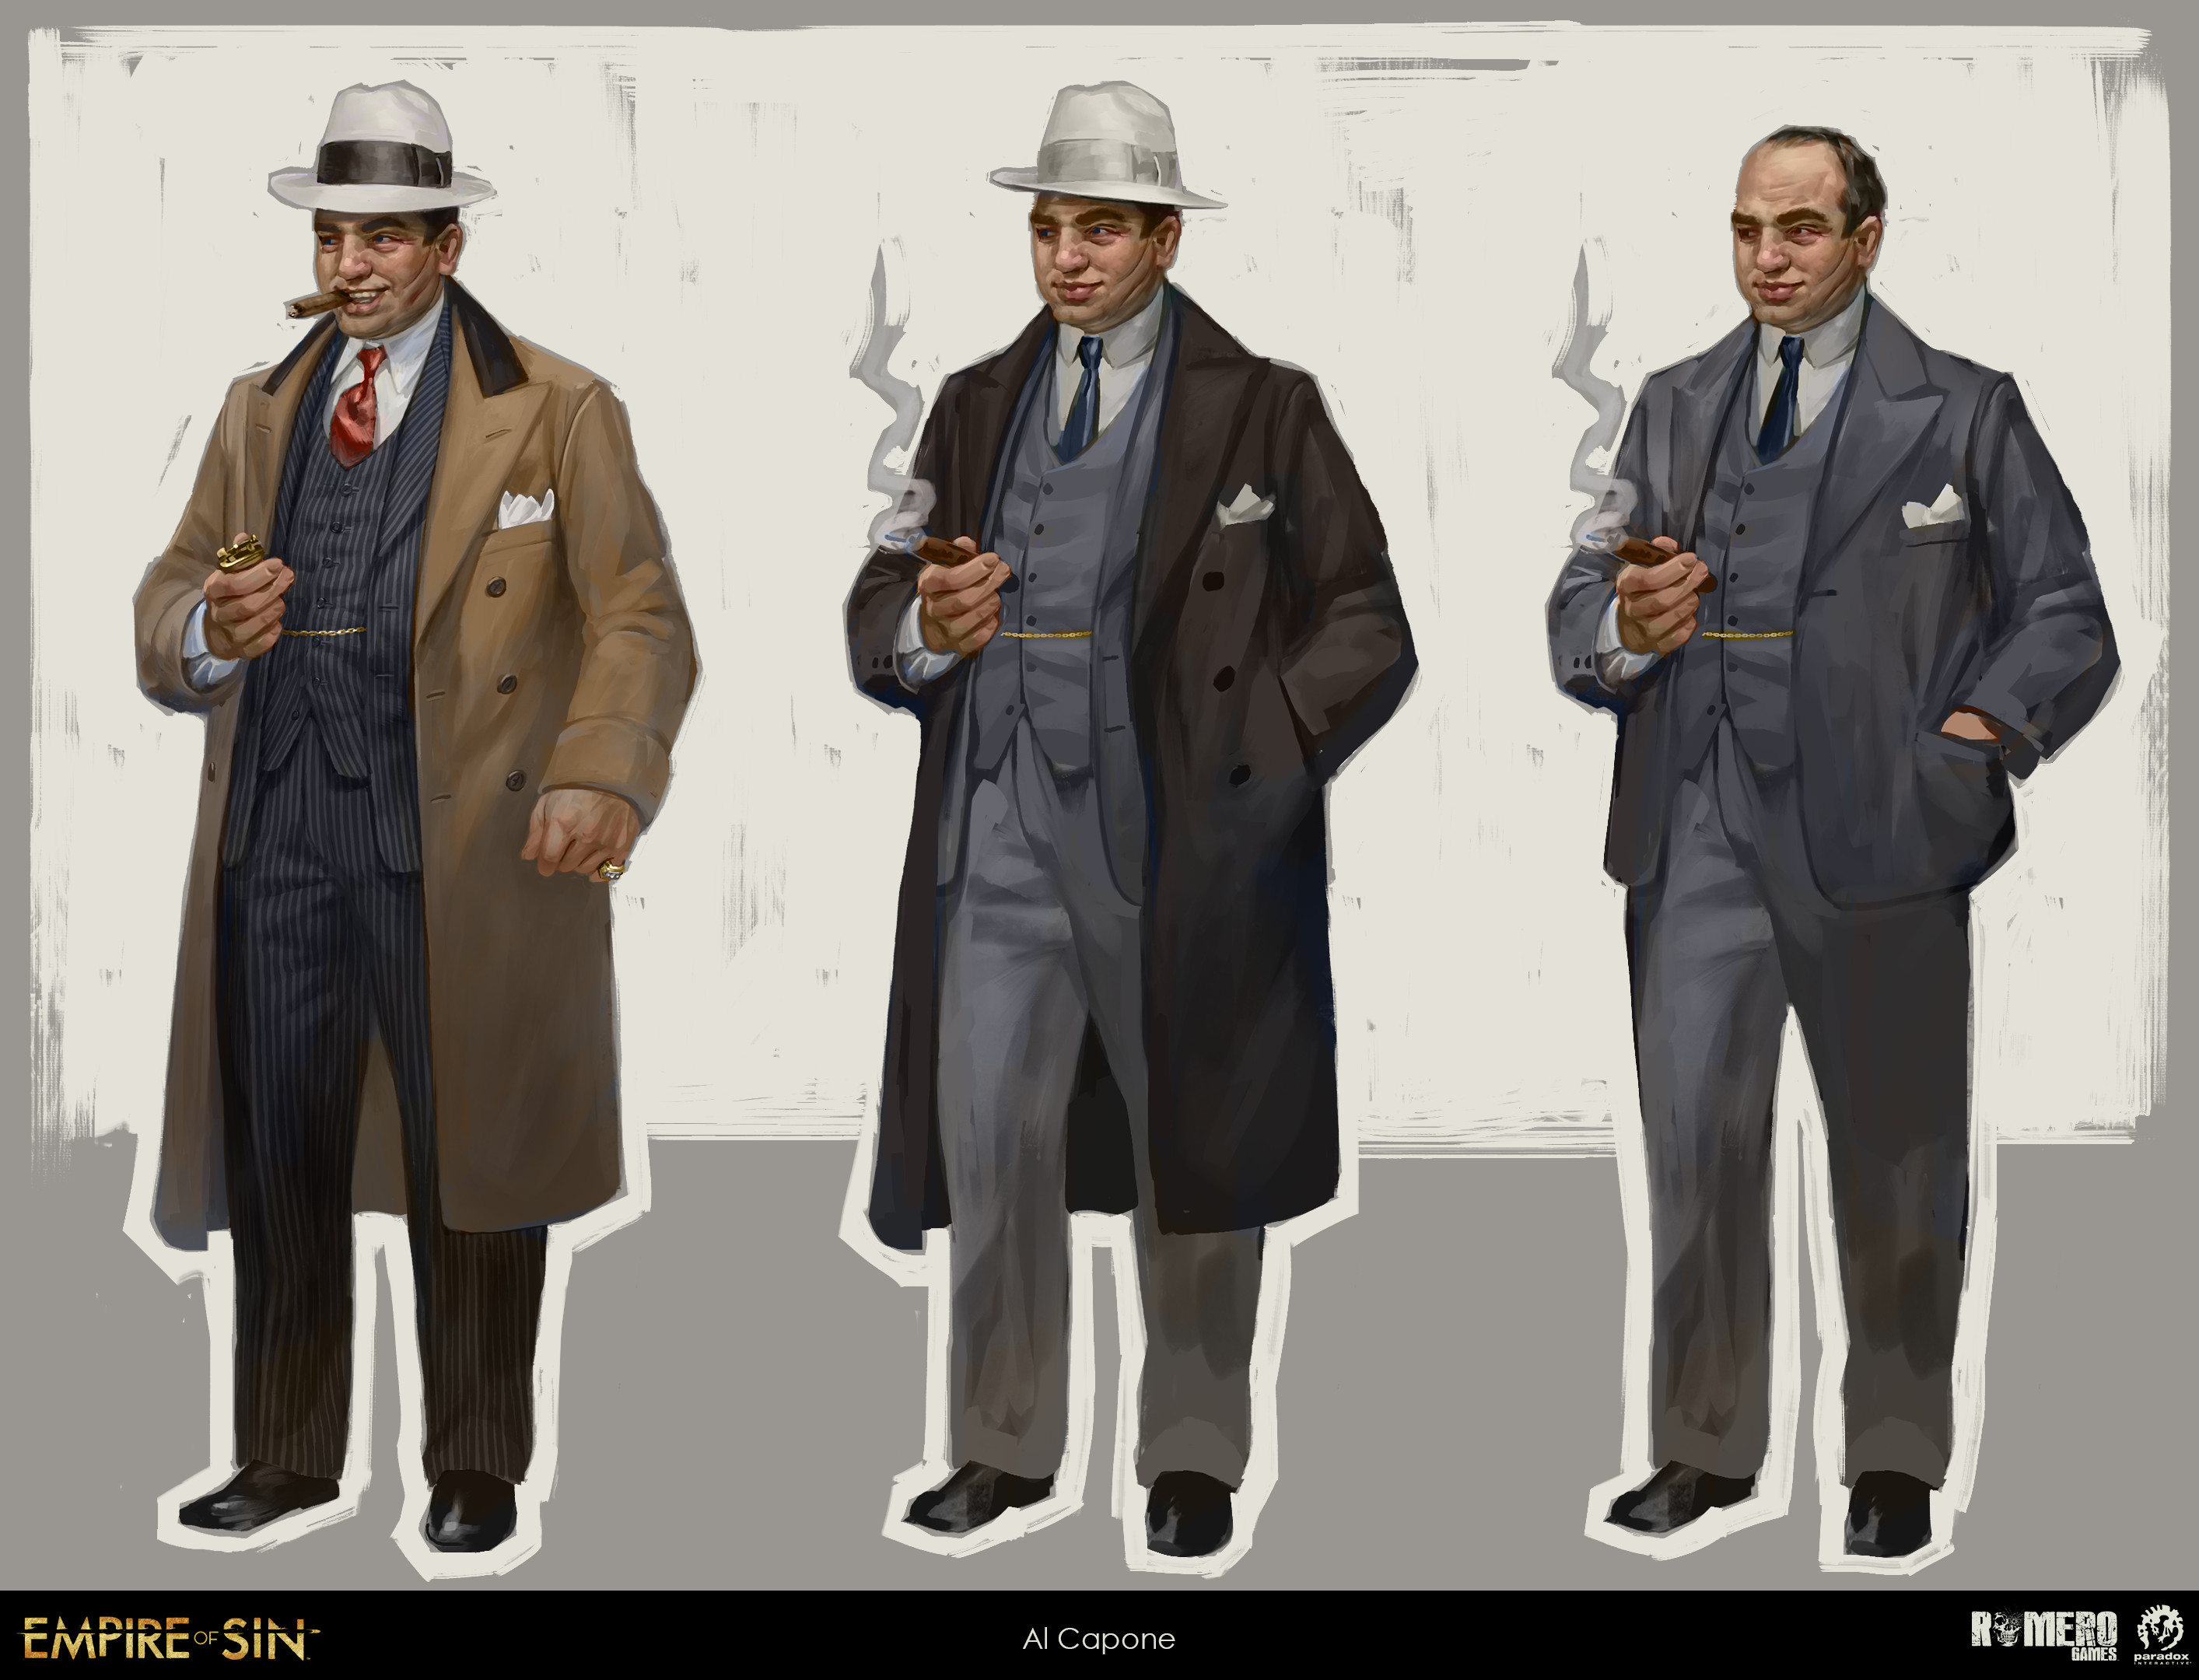 Al Capone concept art. Italian-American boss of The Outfit.